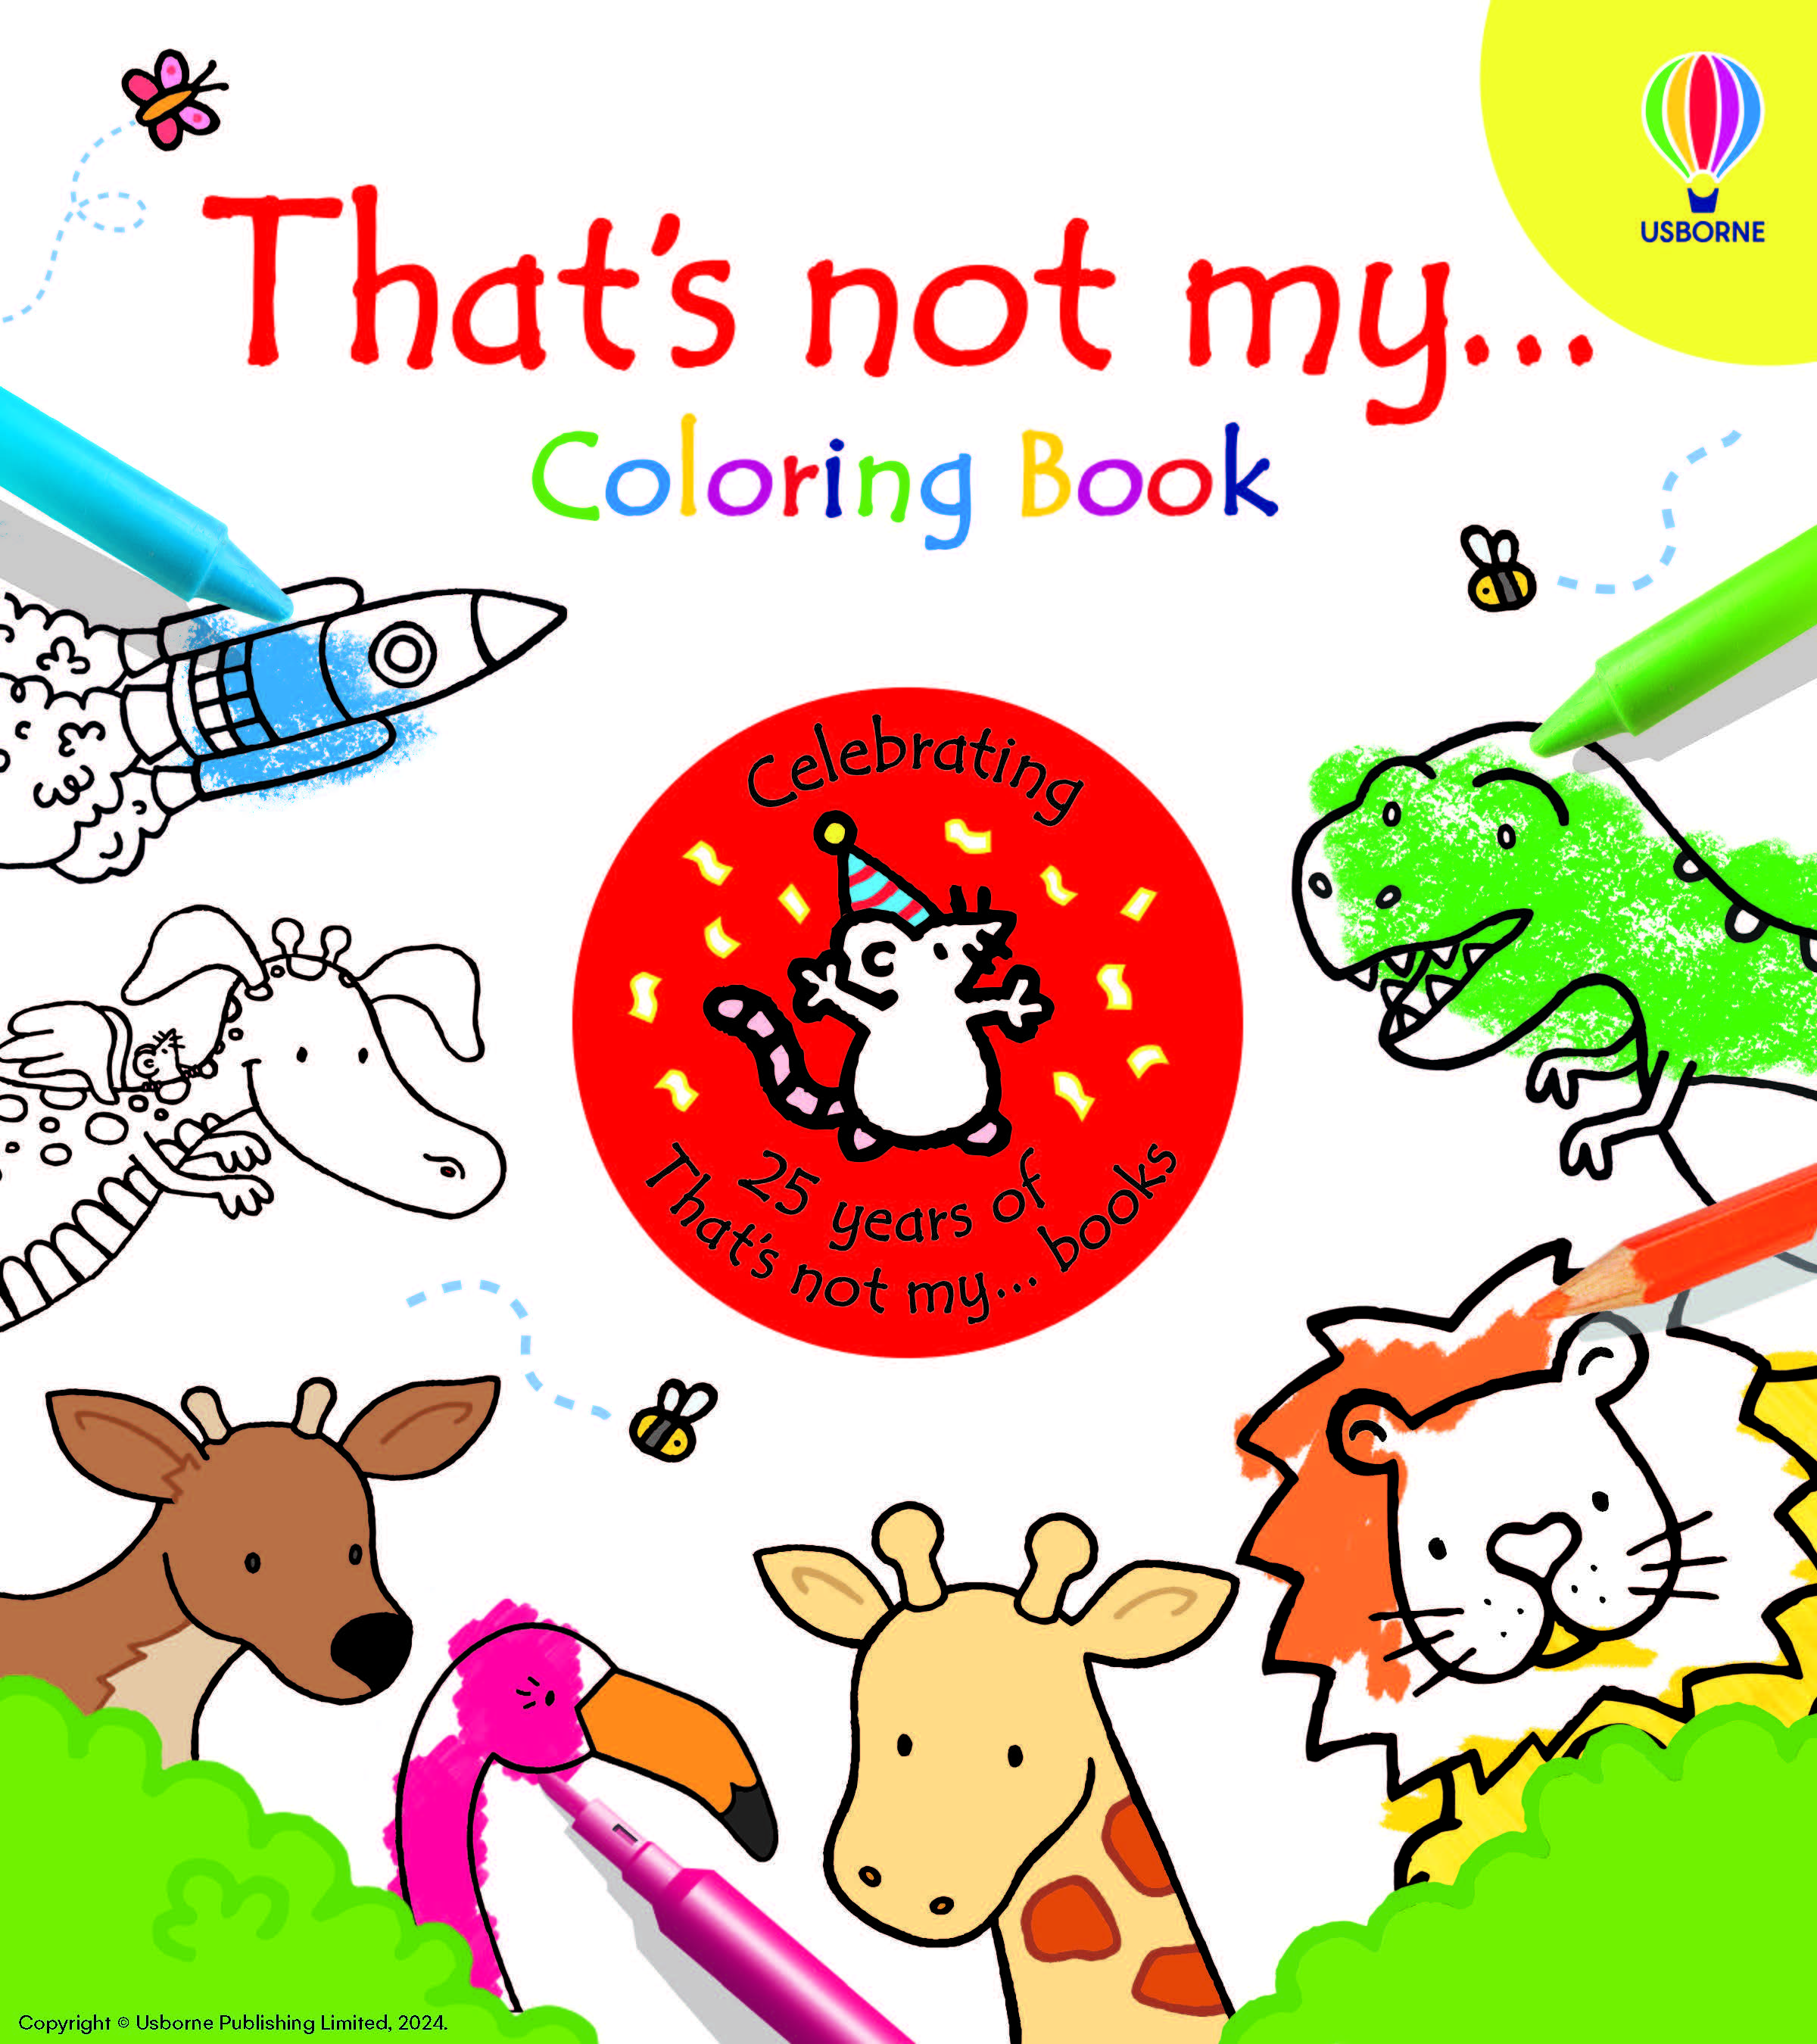 2974-thats-not-my-25-coloring-book-cover-17140737120546.jpg